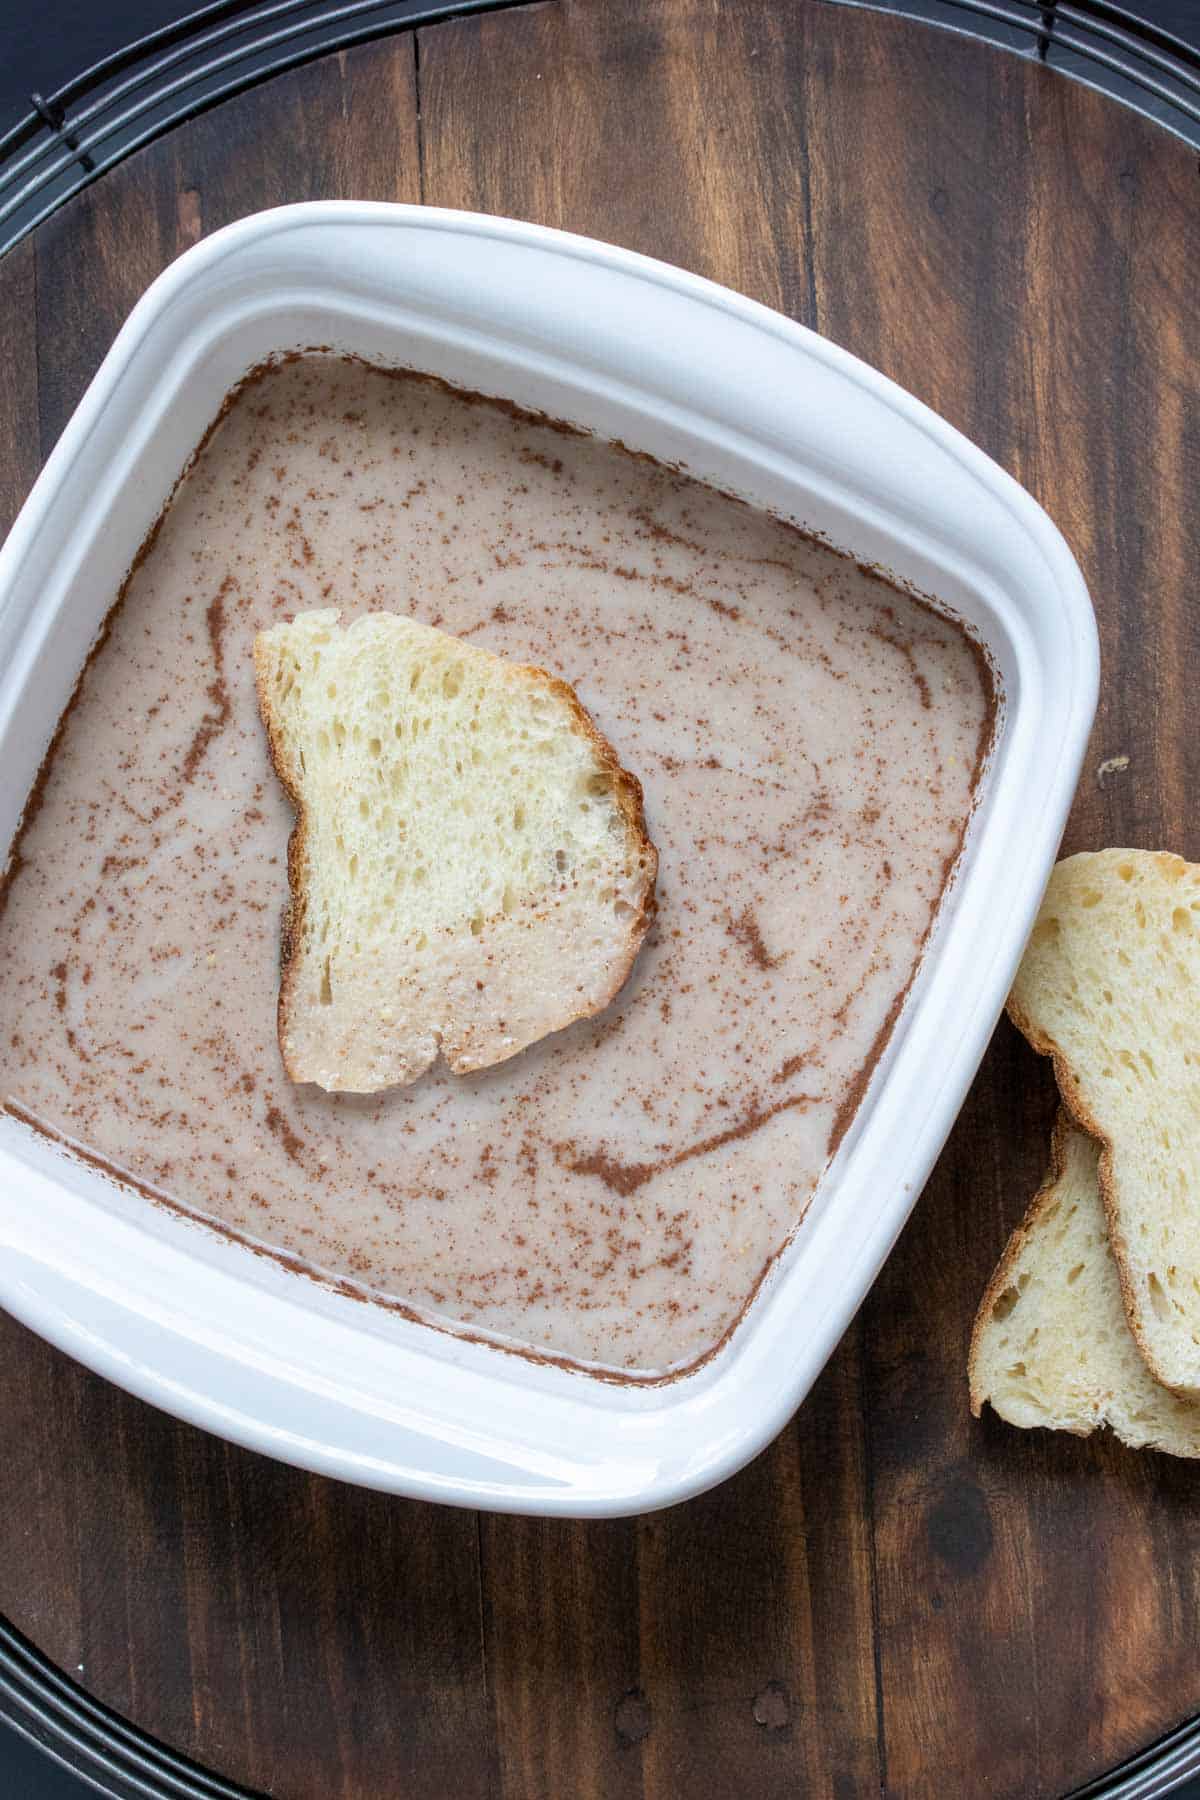 A piece of bread in a white pan filled with brownish milky liquid